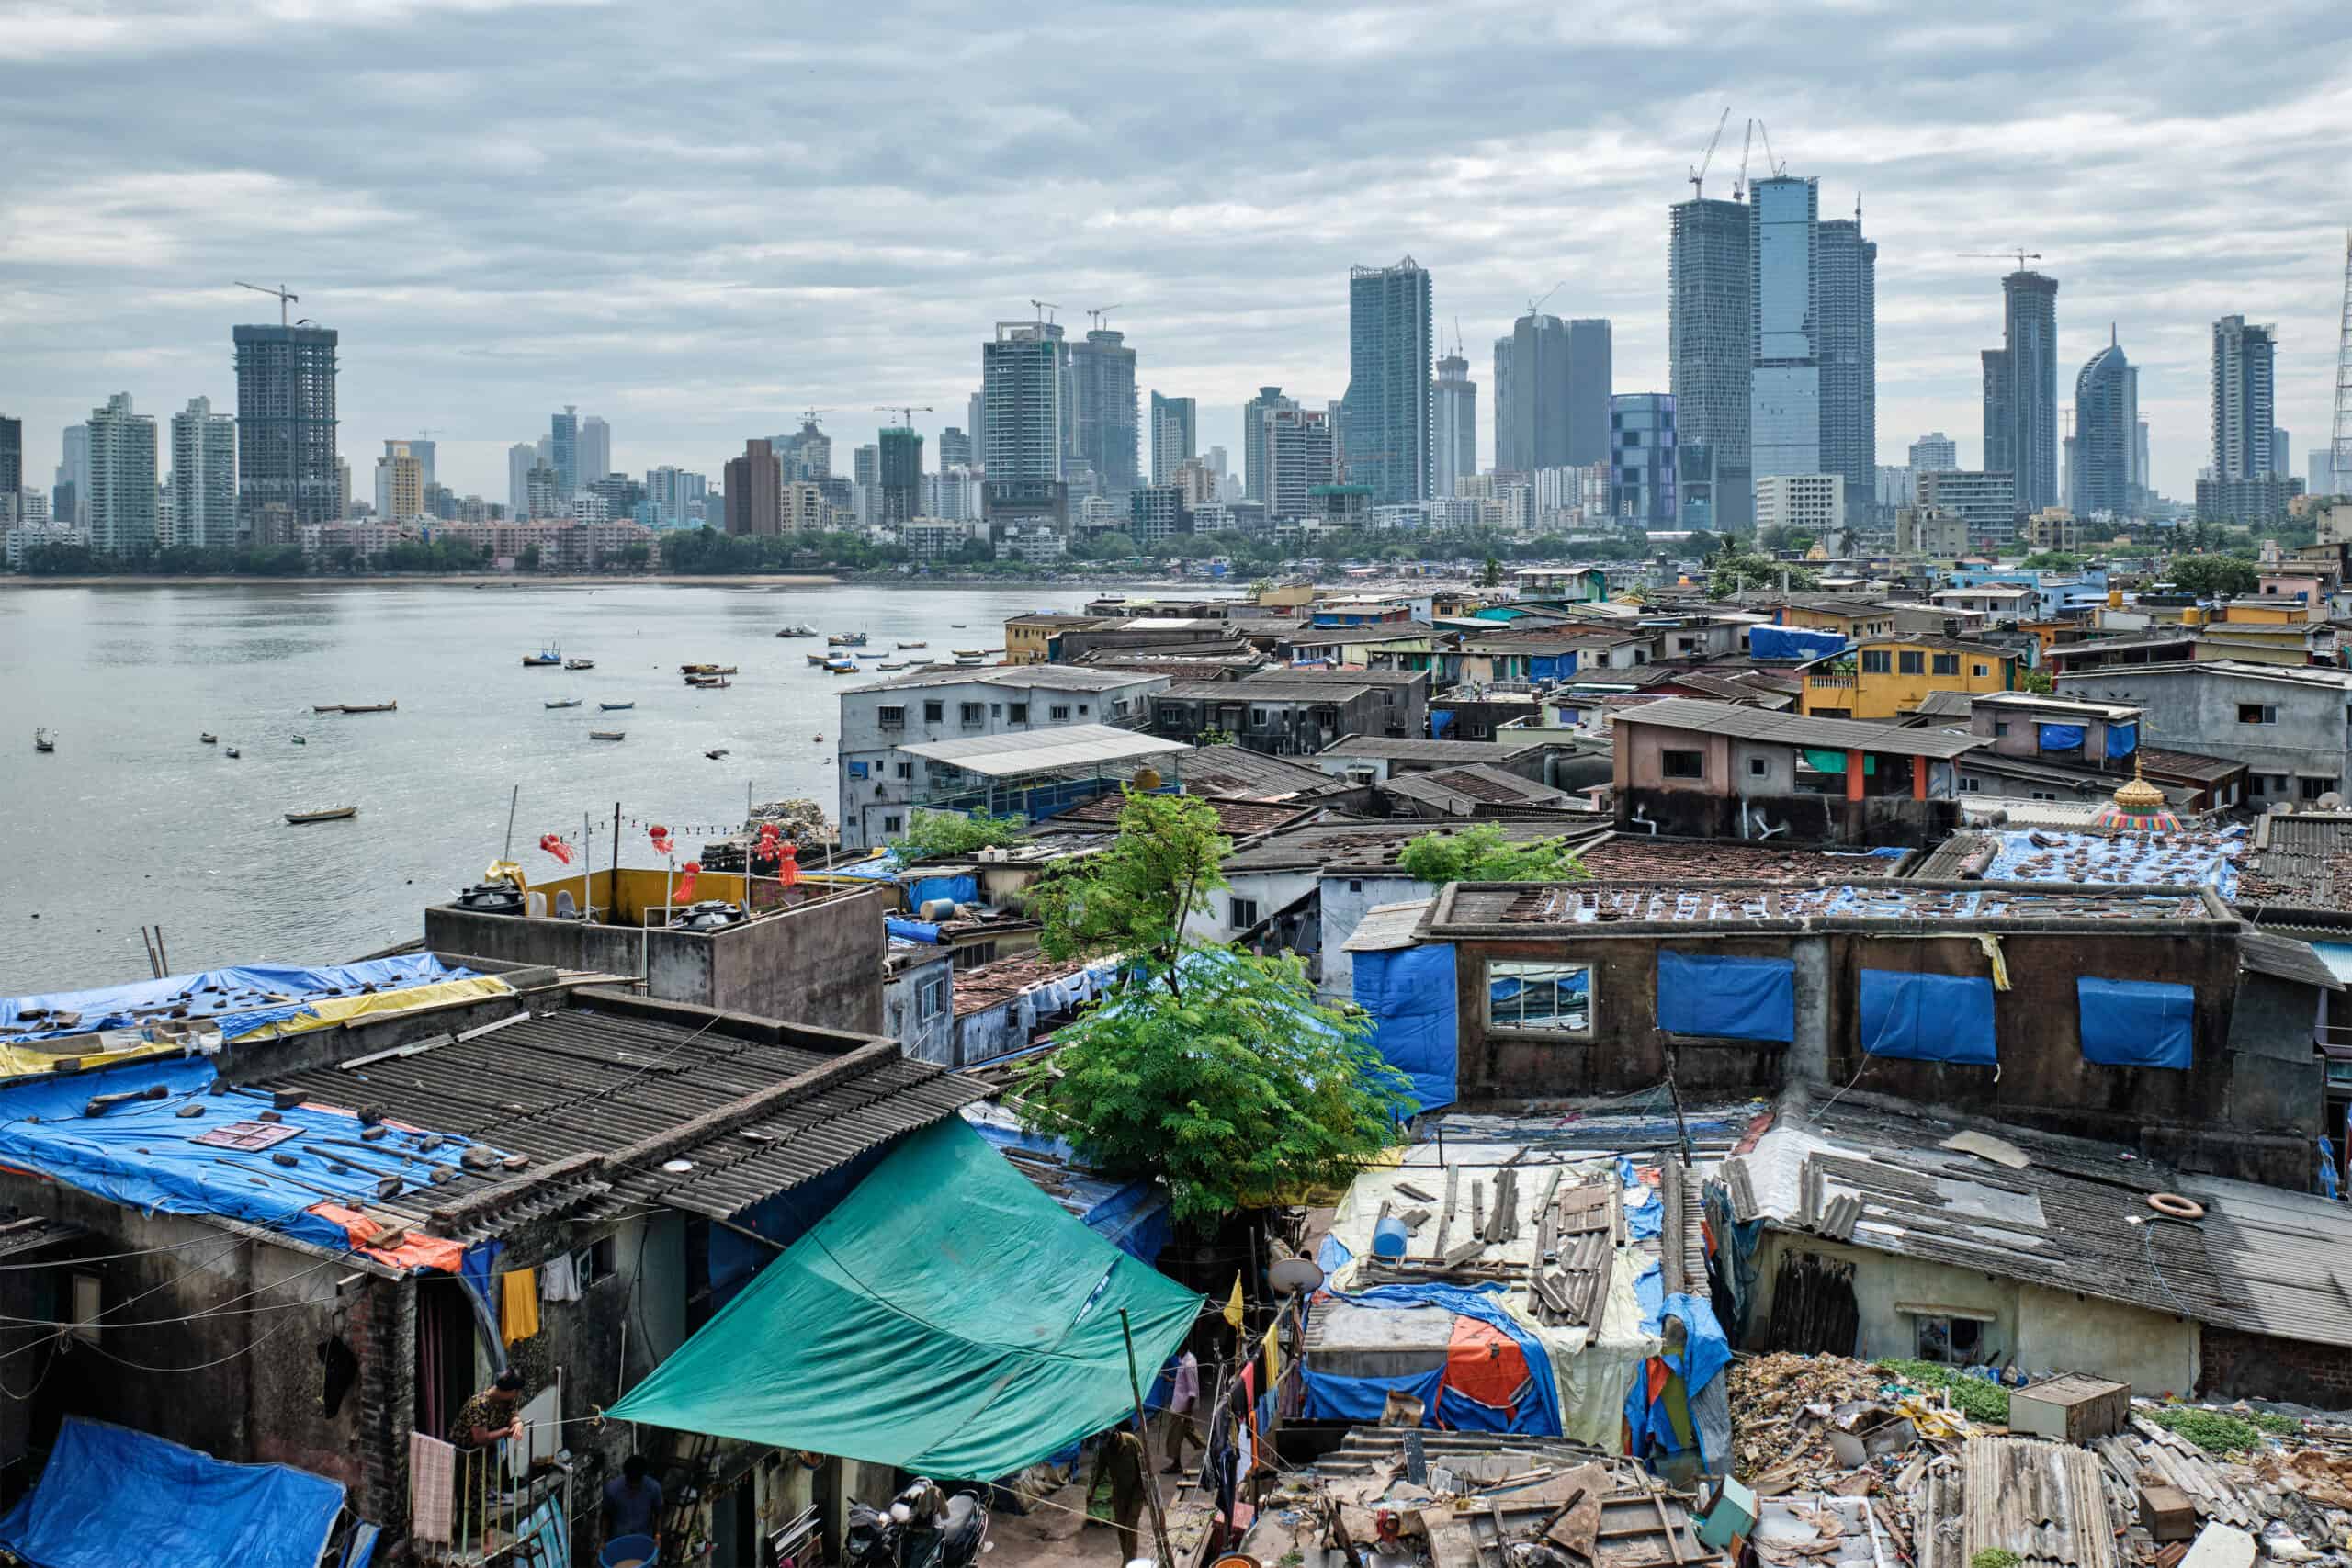 Property rights in the slums of Mumbai?